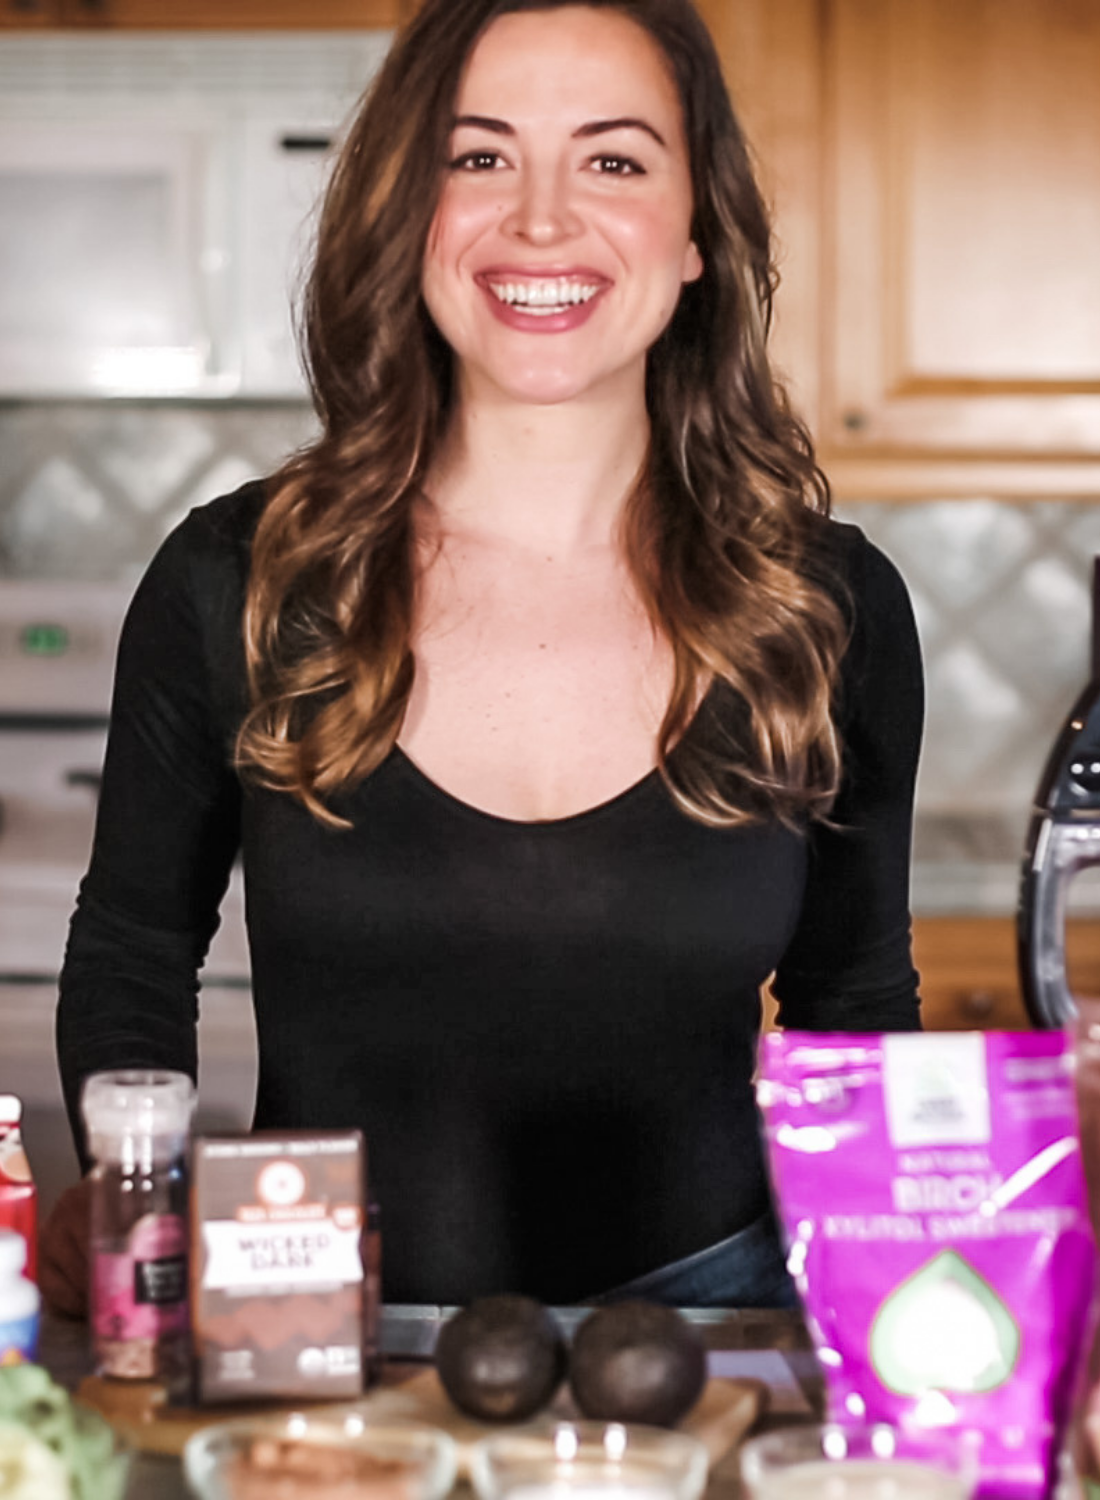 Nutritional Advice with Jessica Pantermuehl